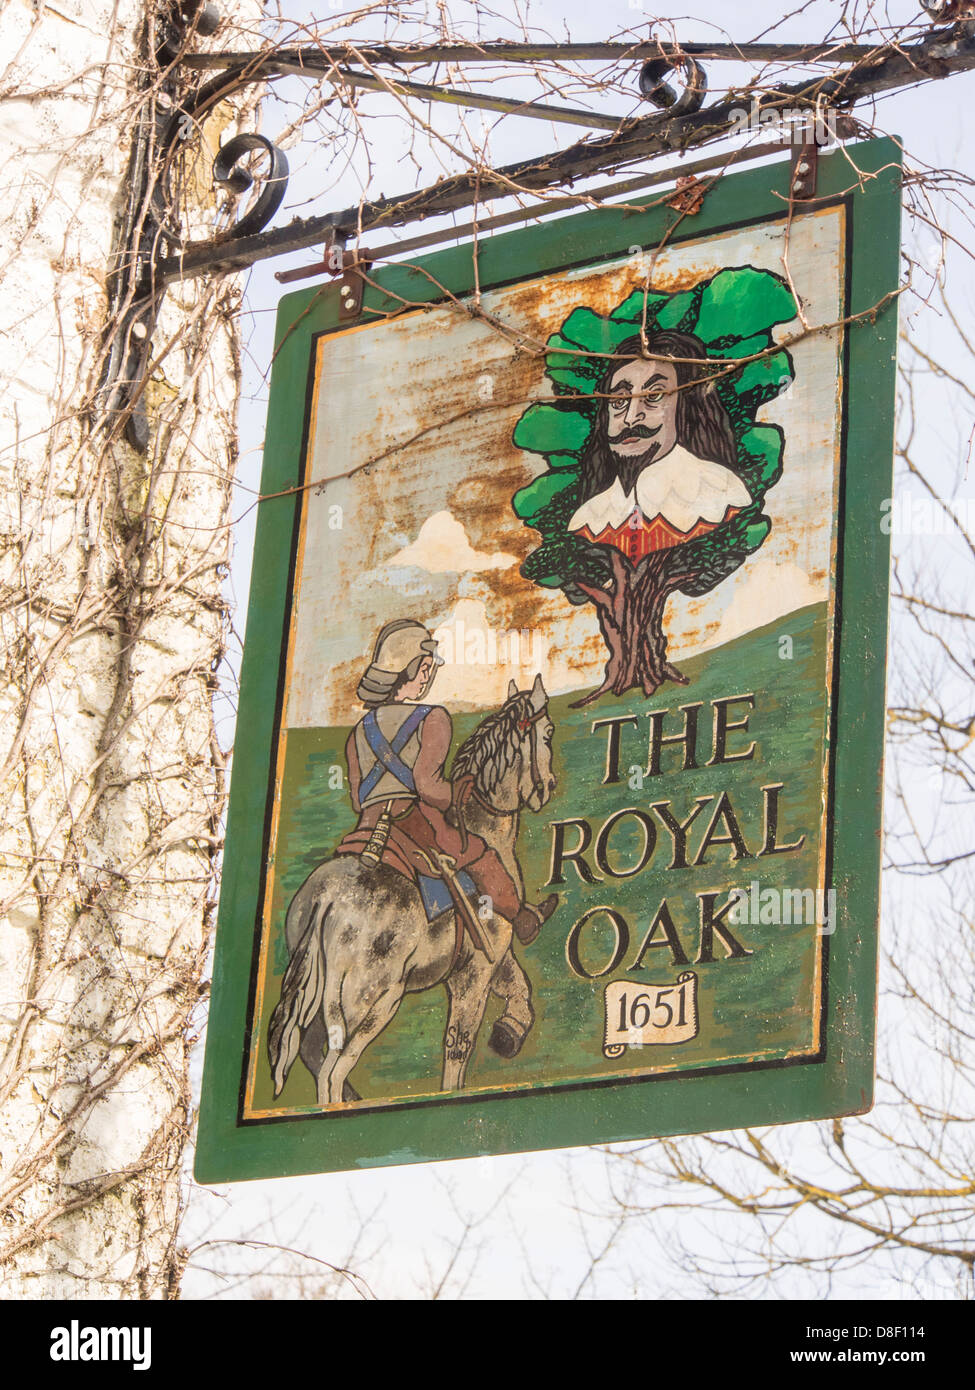 The Royal Oak in Cardington, reputedly the oldest pub in Shropshire, UK. Stock Photo